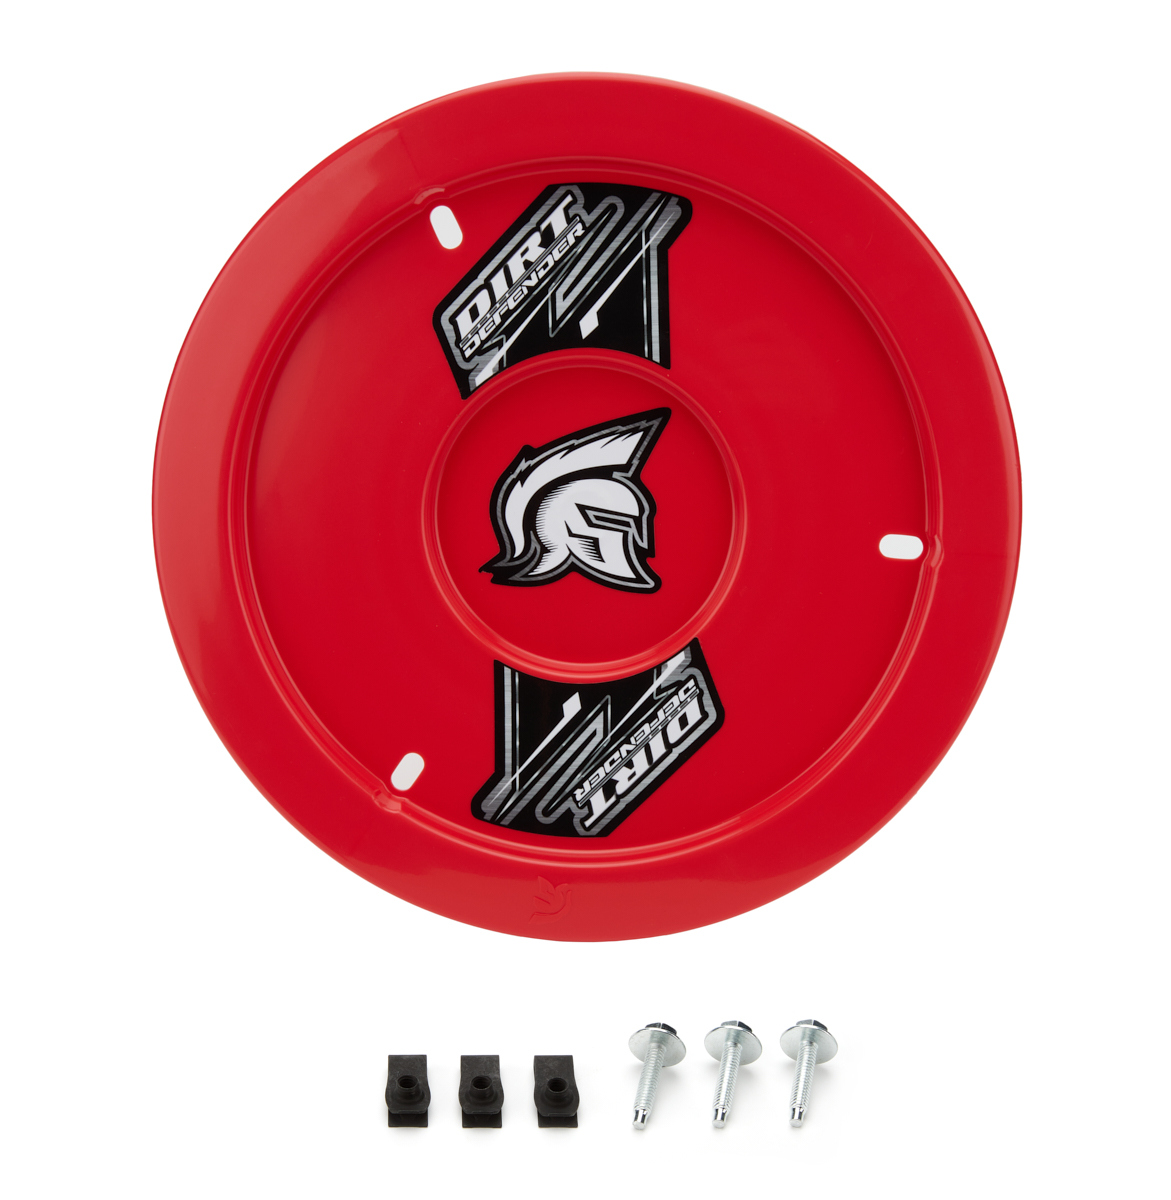 Dirt Defender 10120-2 Mud Cover, Gen II, Bolt-On, Hardware Included, Cover Only, Plastic, Red, 15 in Wheels, Each